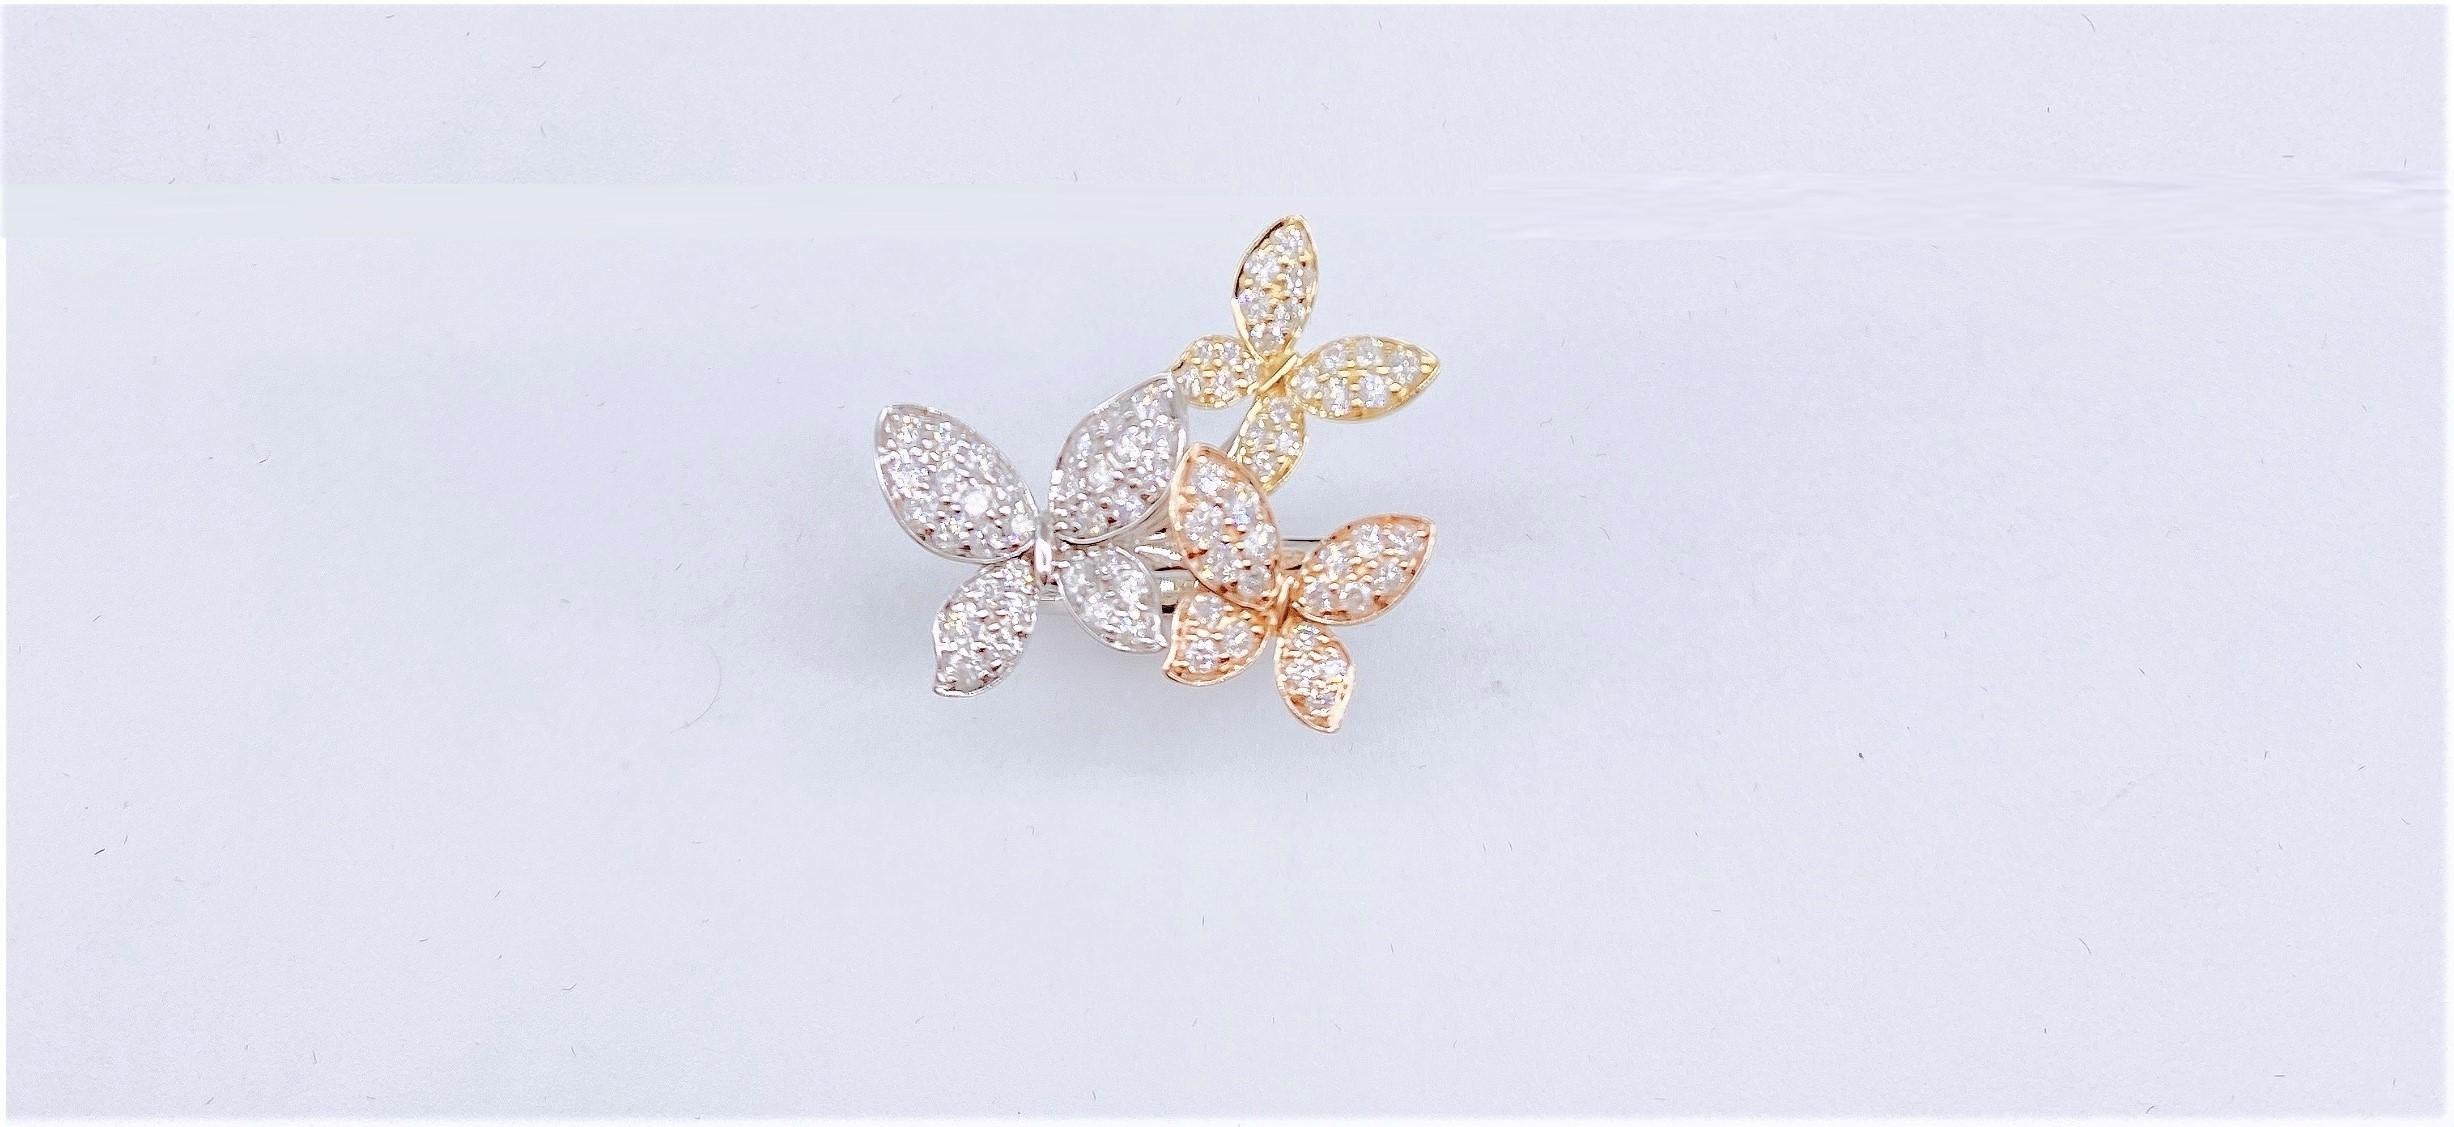 The Following Items we are offering is a Rare Important Radiant 18KT White, Yellow, Rose Gold Gorgeous Glittering Butterfly Diamond Ring Featuring Three Gorgeous Diamond 18KT Yellow and White Gold Rose Gold Butterflies with Spectacular Round